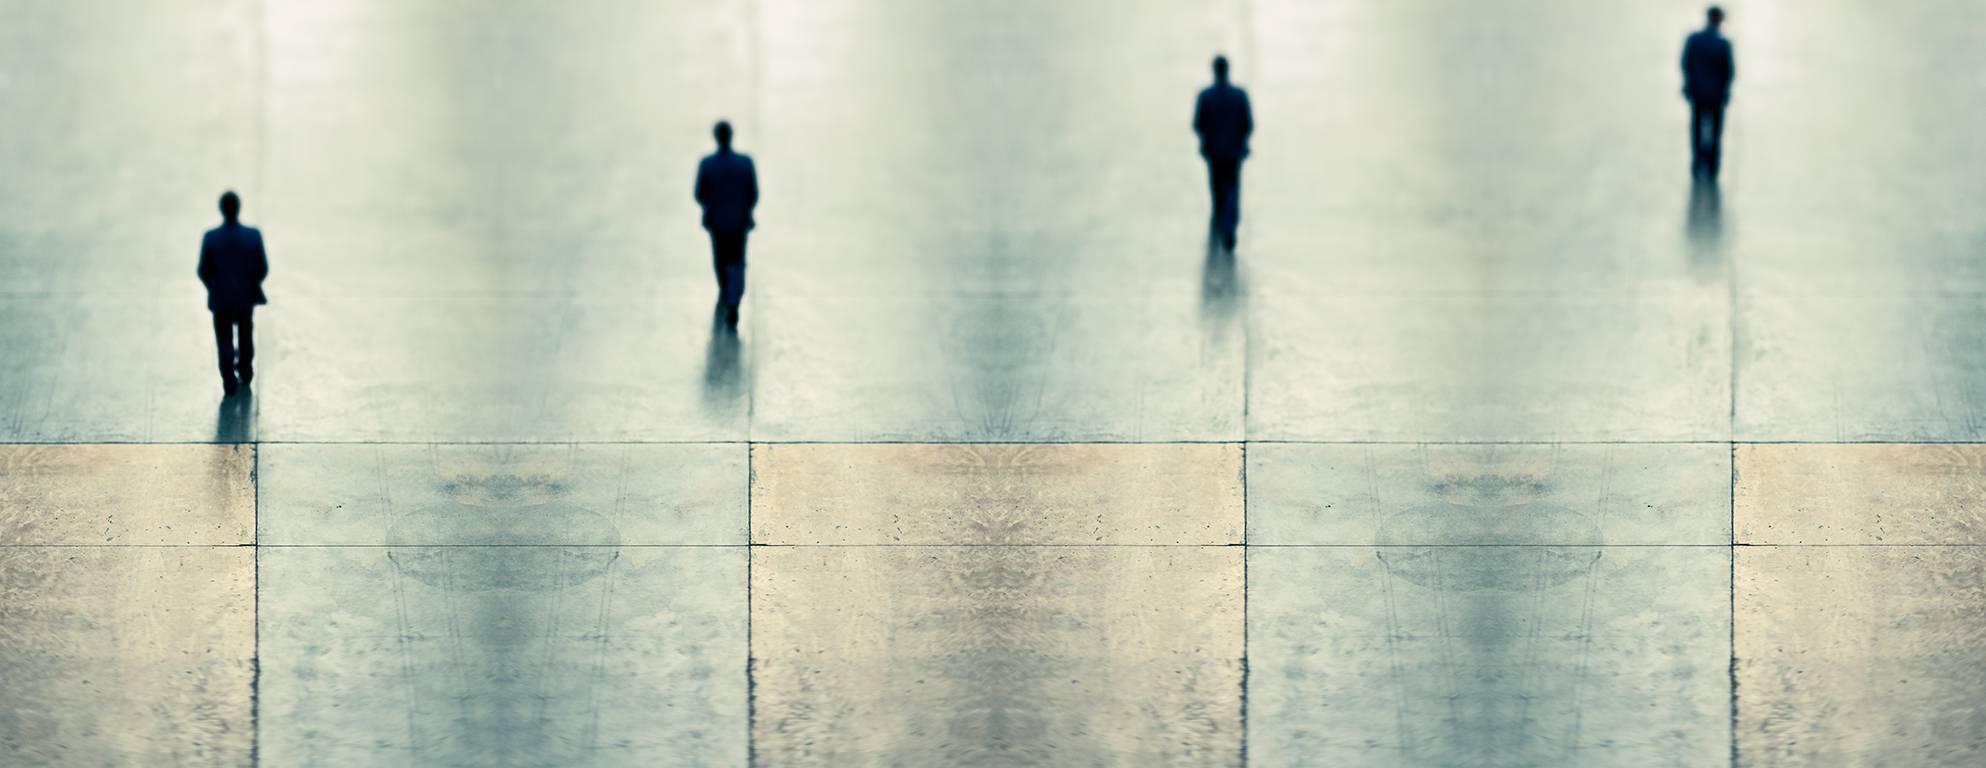 Luca Di Filippo Figurative Photograph - Contemporary Photography: The Walk (Tate People Collages)